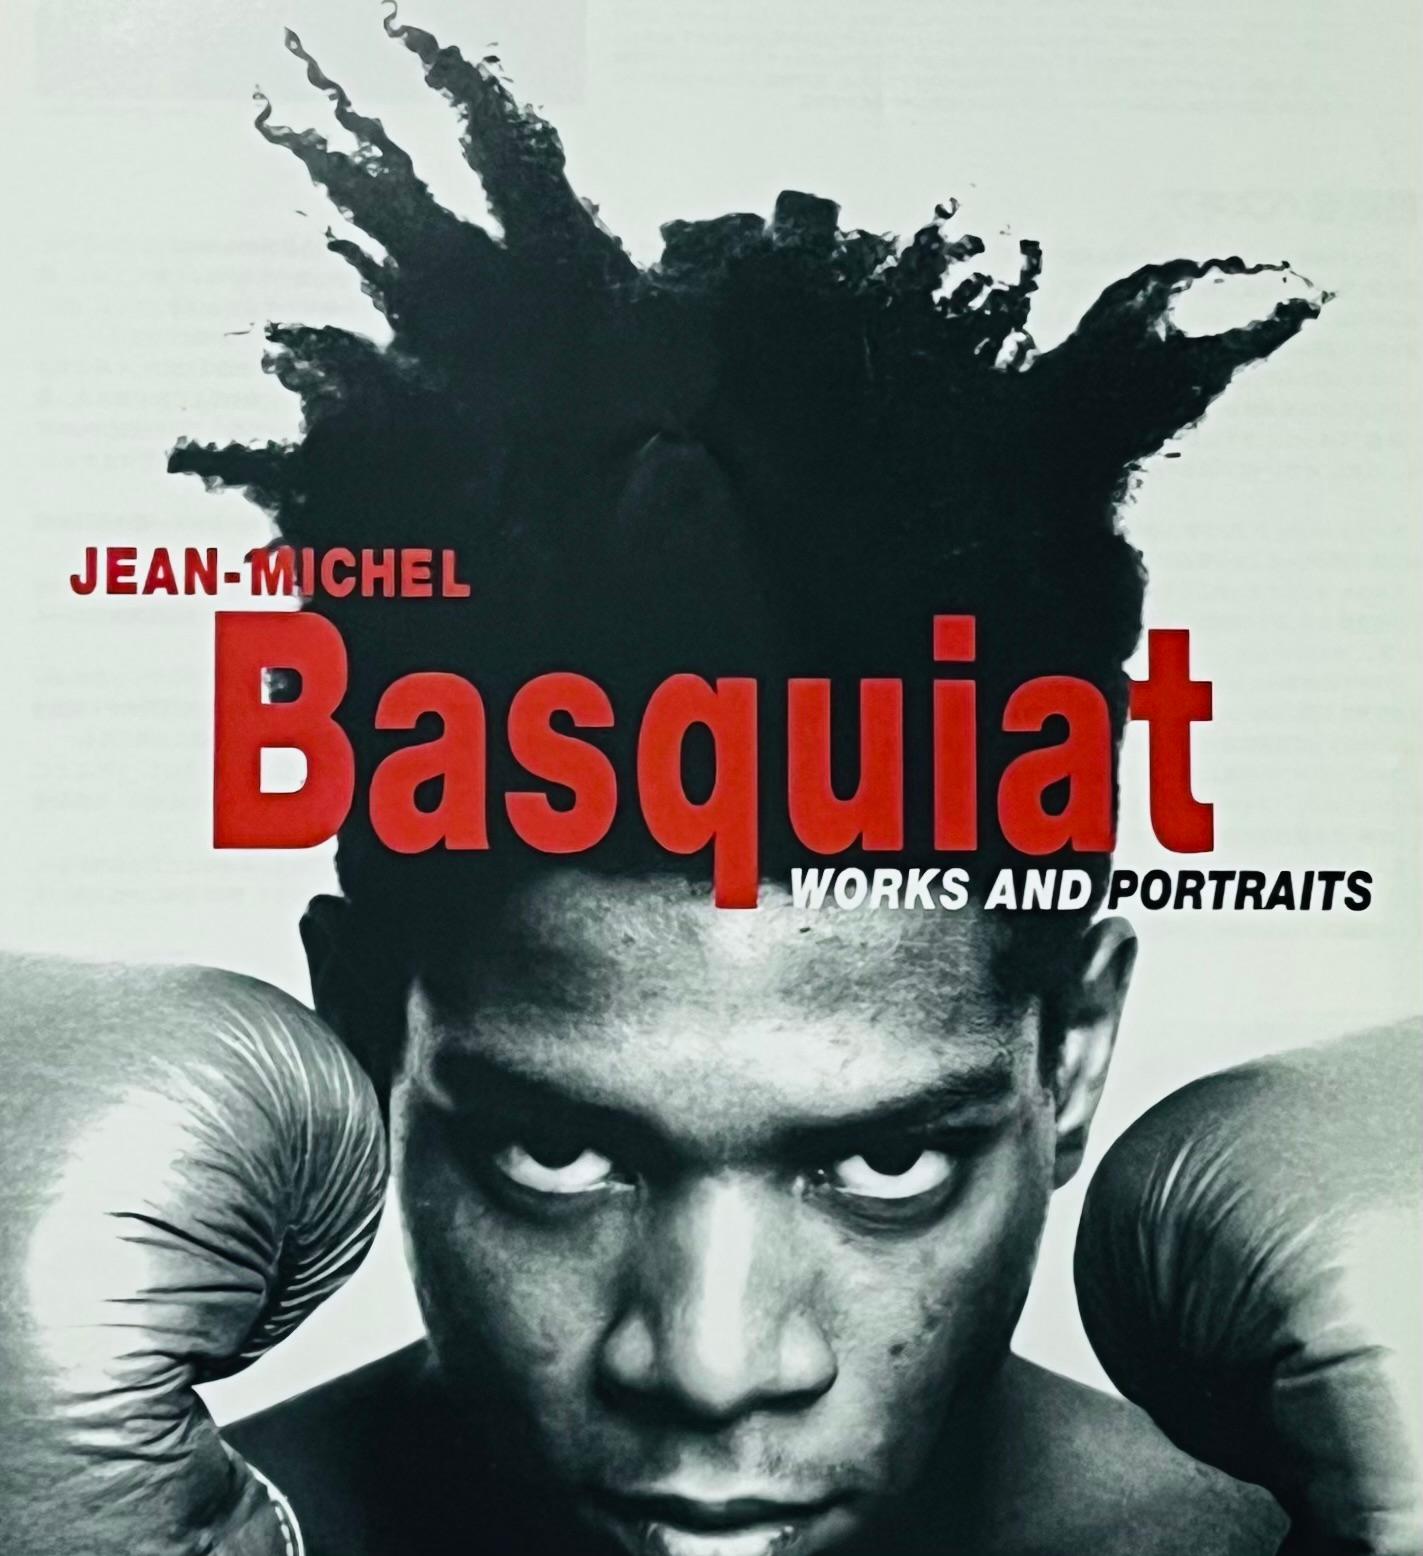 Basquiat boxing poster 1997:
This rare double-sided 1997 Basquiat boxing poster was published on occasion of the 1990s exhibition, “Jean-Michel Basquiat Works and Portraits” at Parco Gallery Tokyo (July/August 1997); and in conjunction with the